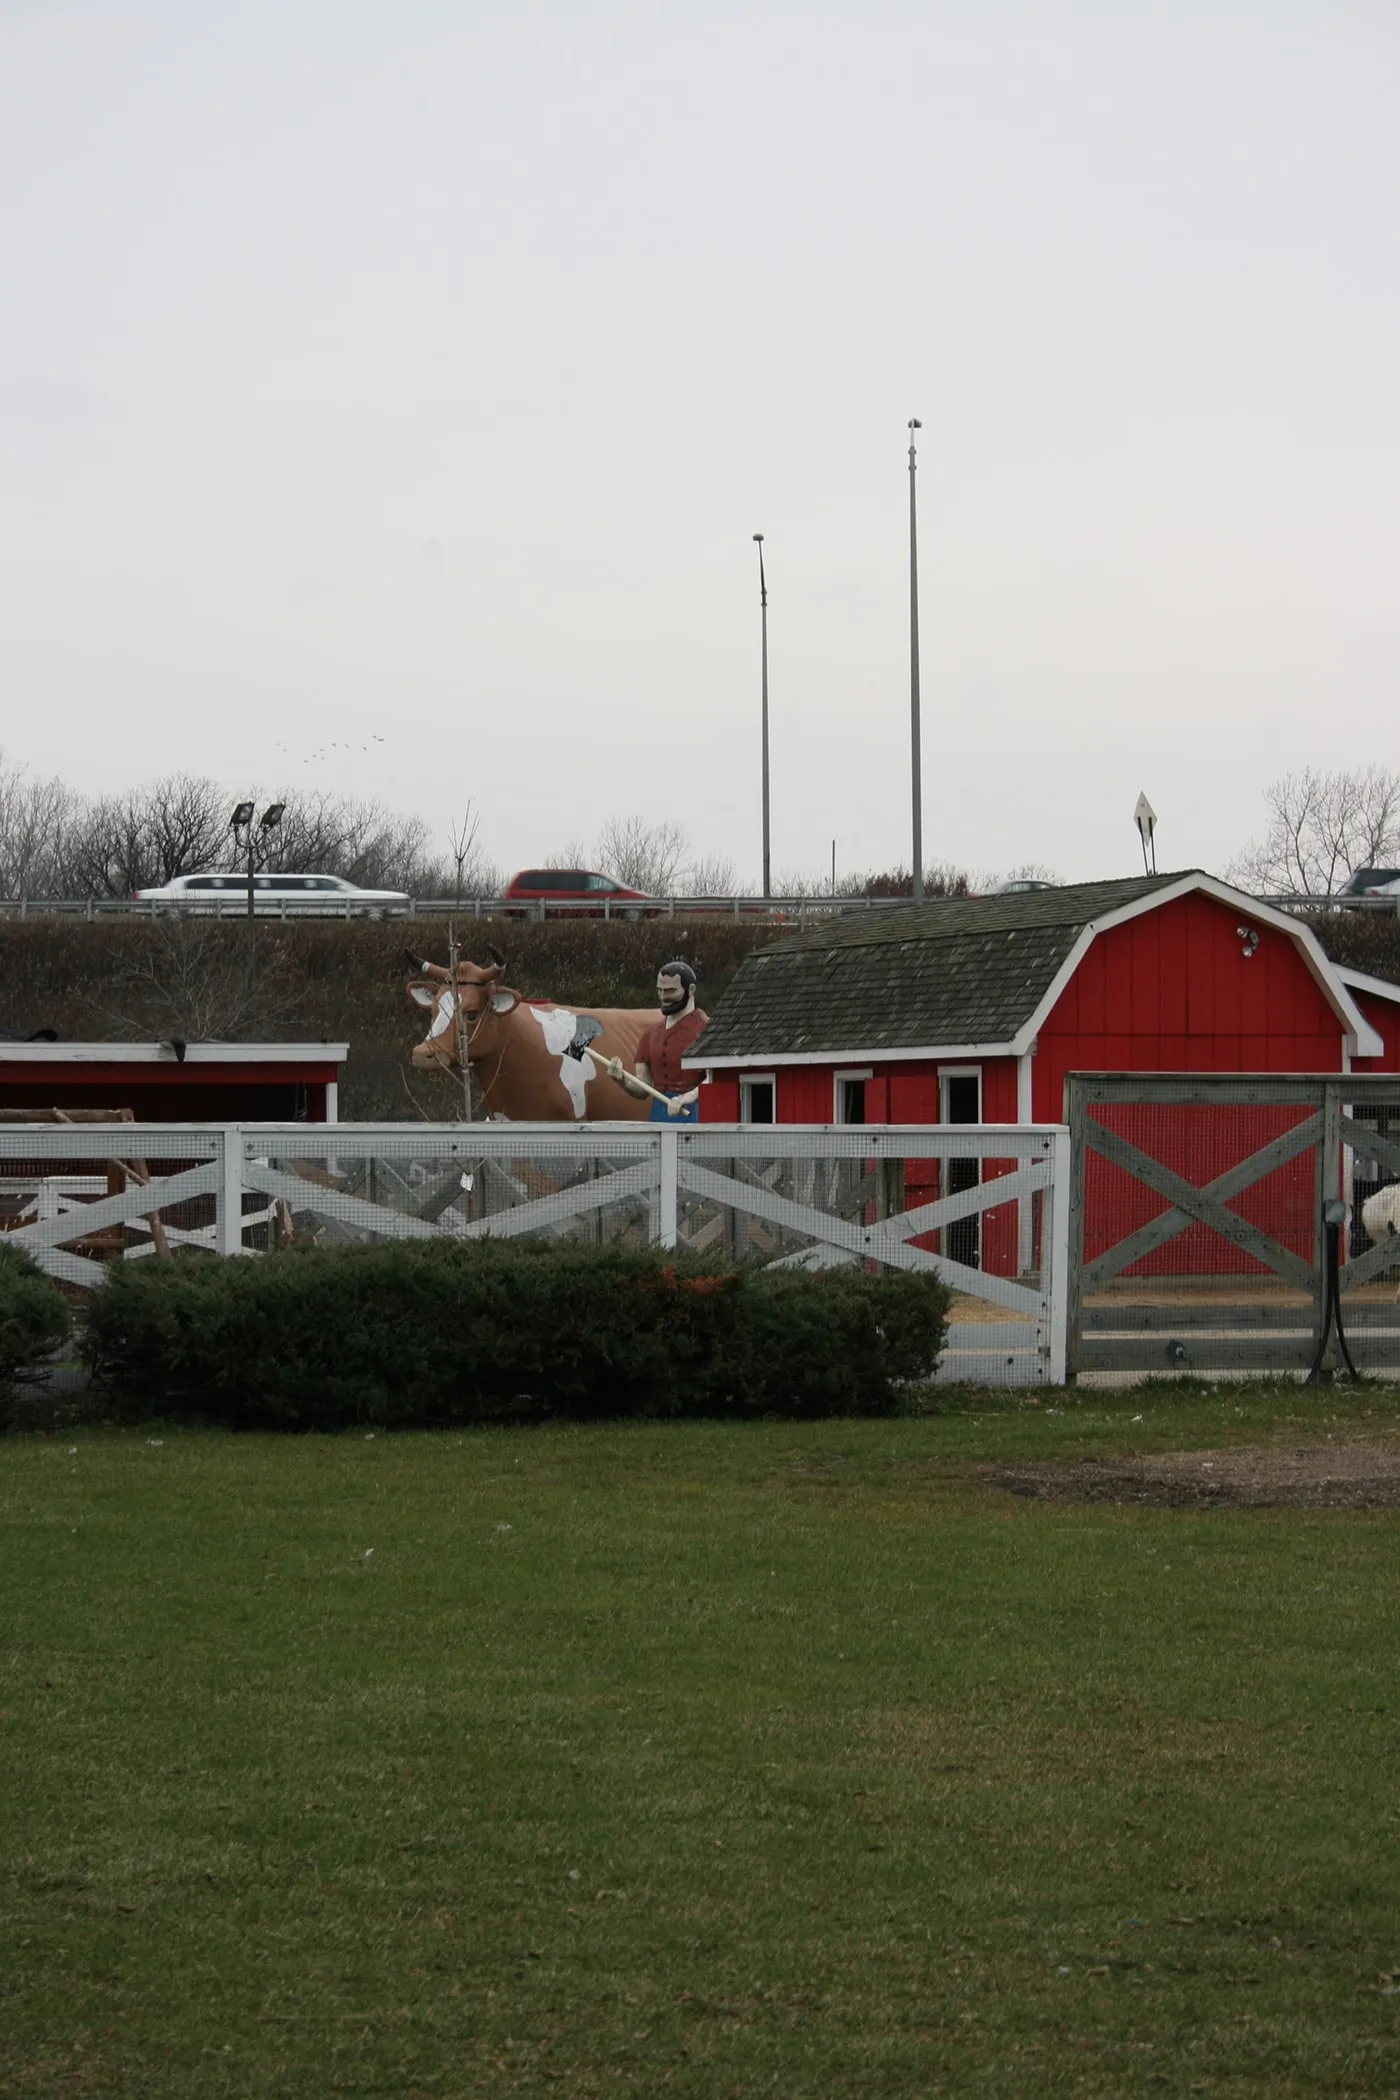 Muffler Man and Bessie the Cow in Libertyville, Illinois